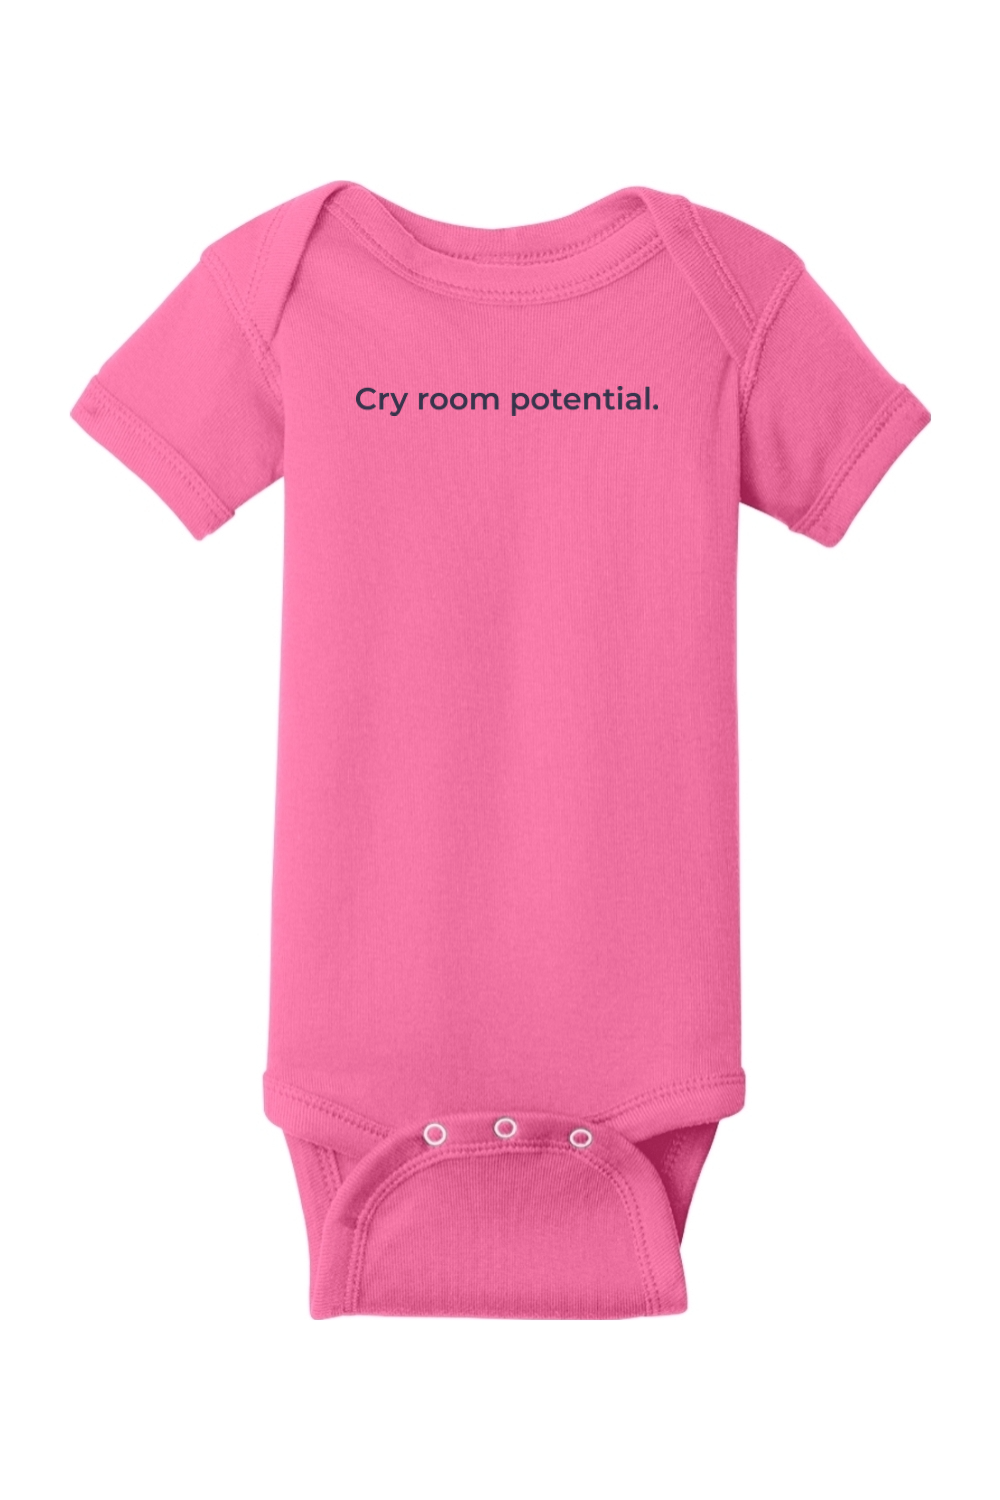 Cry Room Potential Onesie